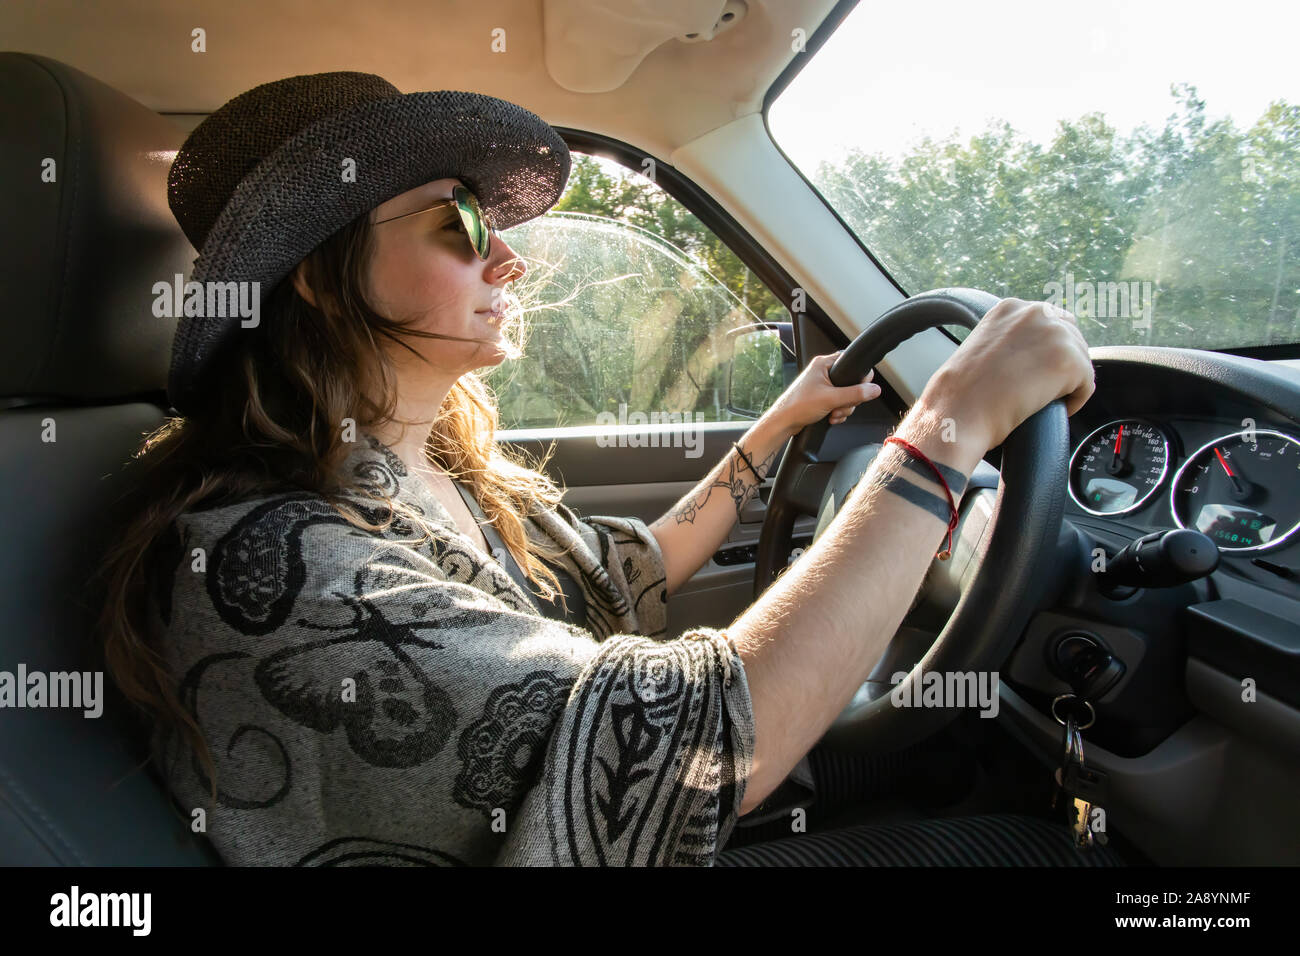 Young woman driving her big SUV. General view of cabin from the sideways. Woods and green environment at backgorund. Lifestyle. Stock Photo